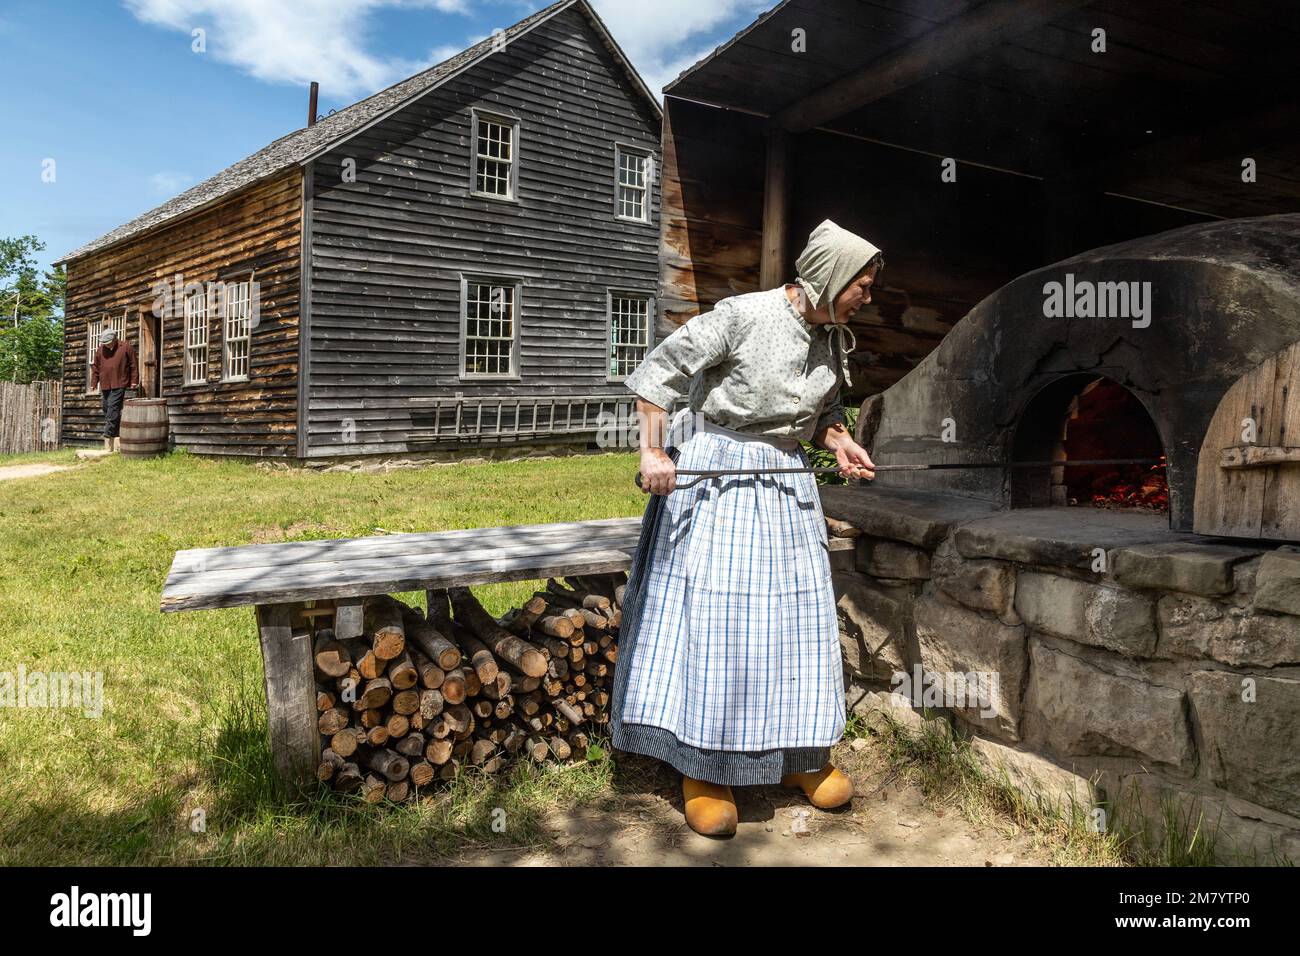 BREAD OVEN IN FRONT OF THE CYR HOUSE BUILT IN 1852, HISTORIC ACADIAN VILLAGE, BERTRAND, NEW BRUNSWICK, CANADA, NORTH AMERICA Stock Photo